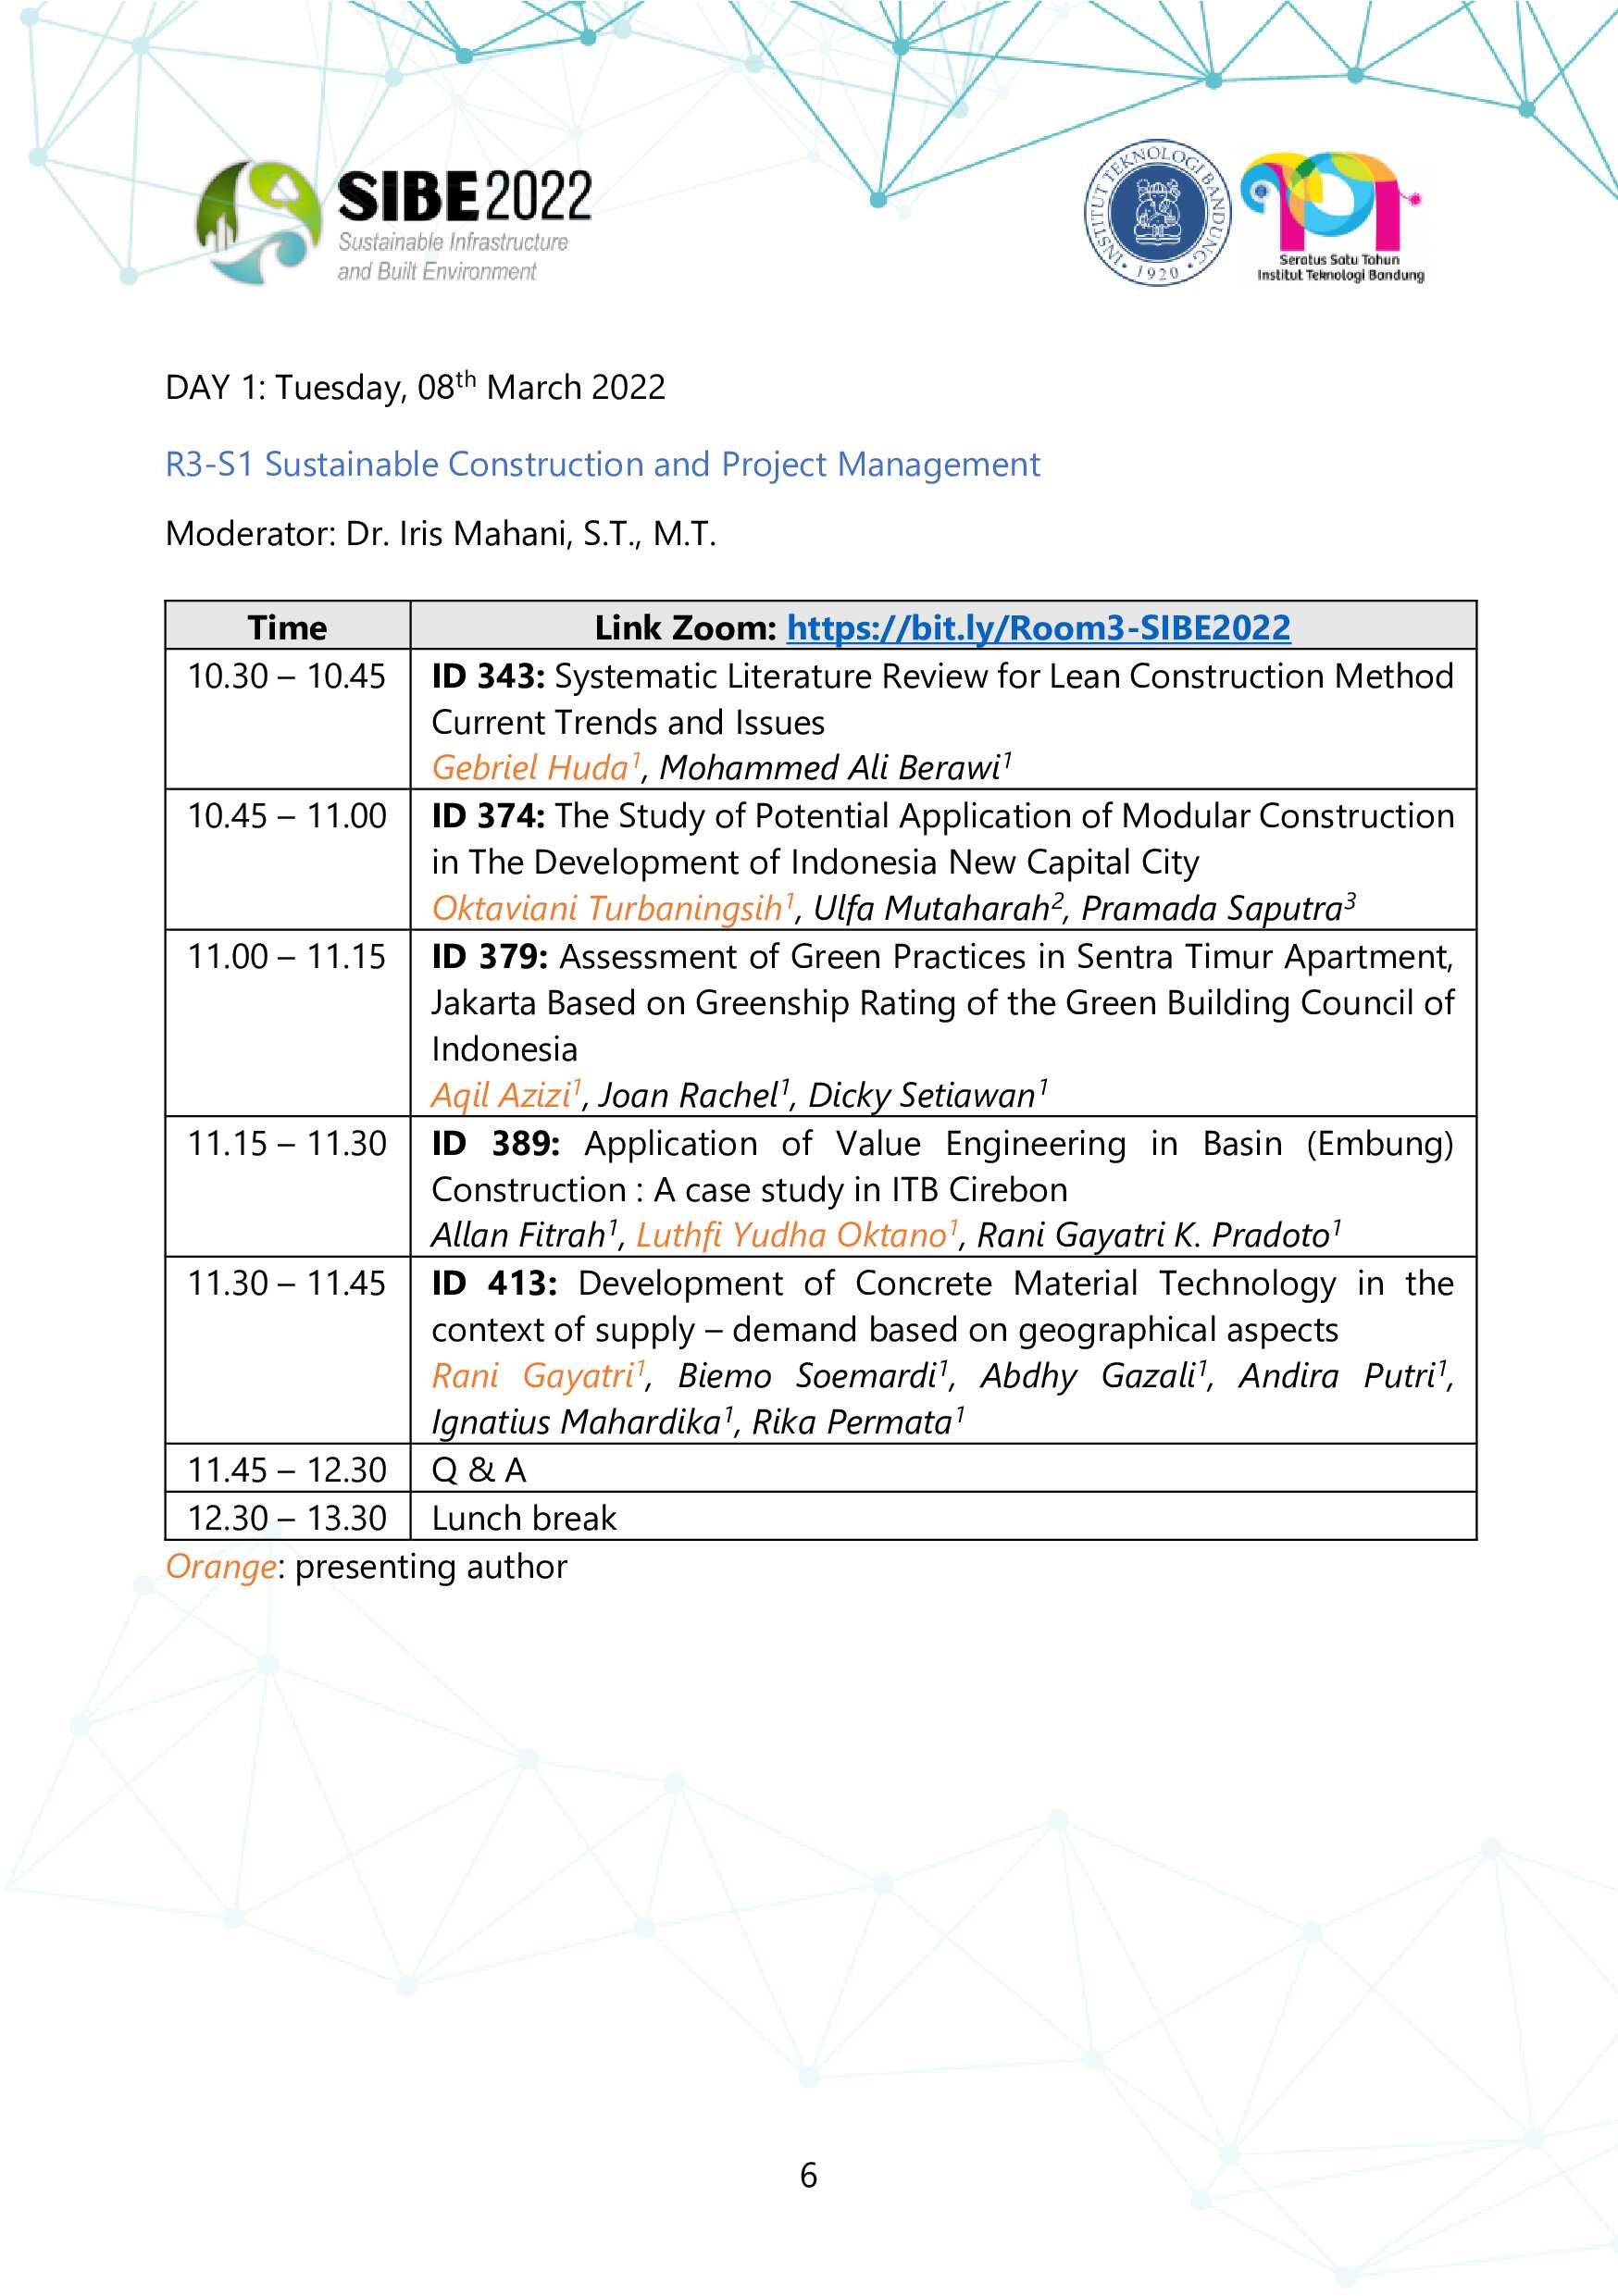 SIBE 2022 Program Schedule 8-9 March 2022-5